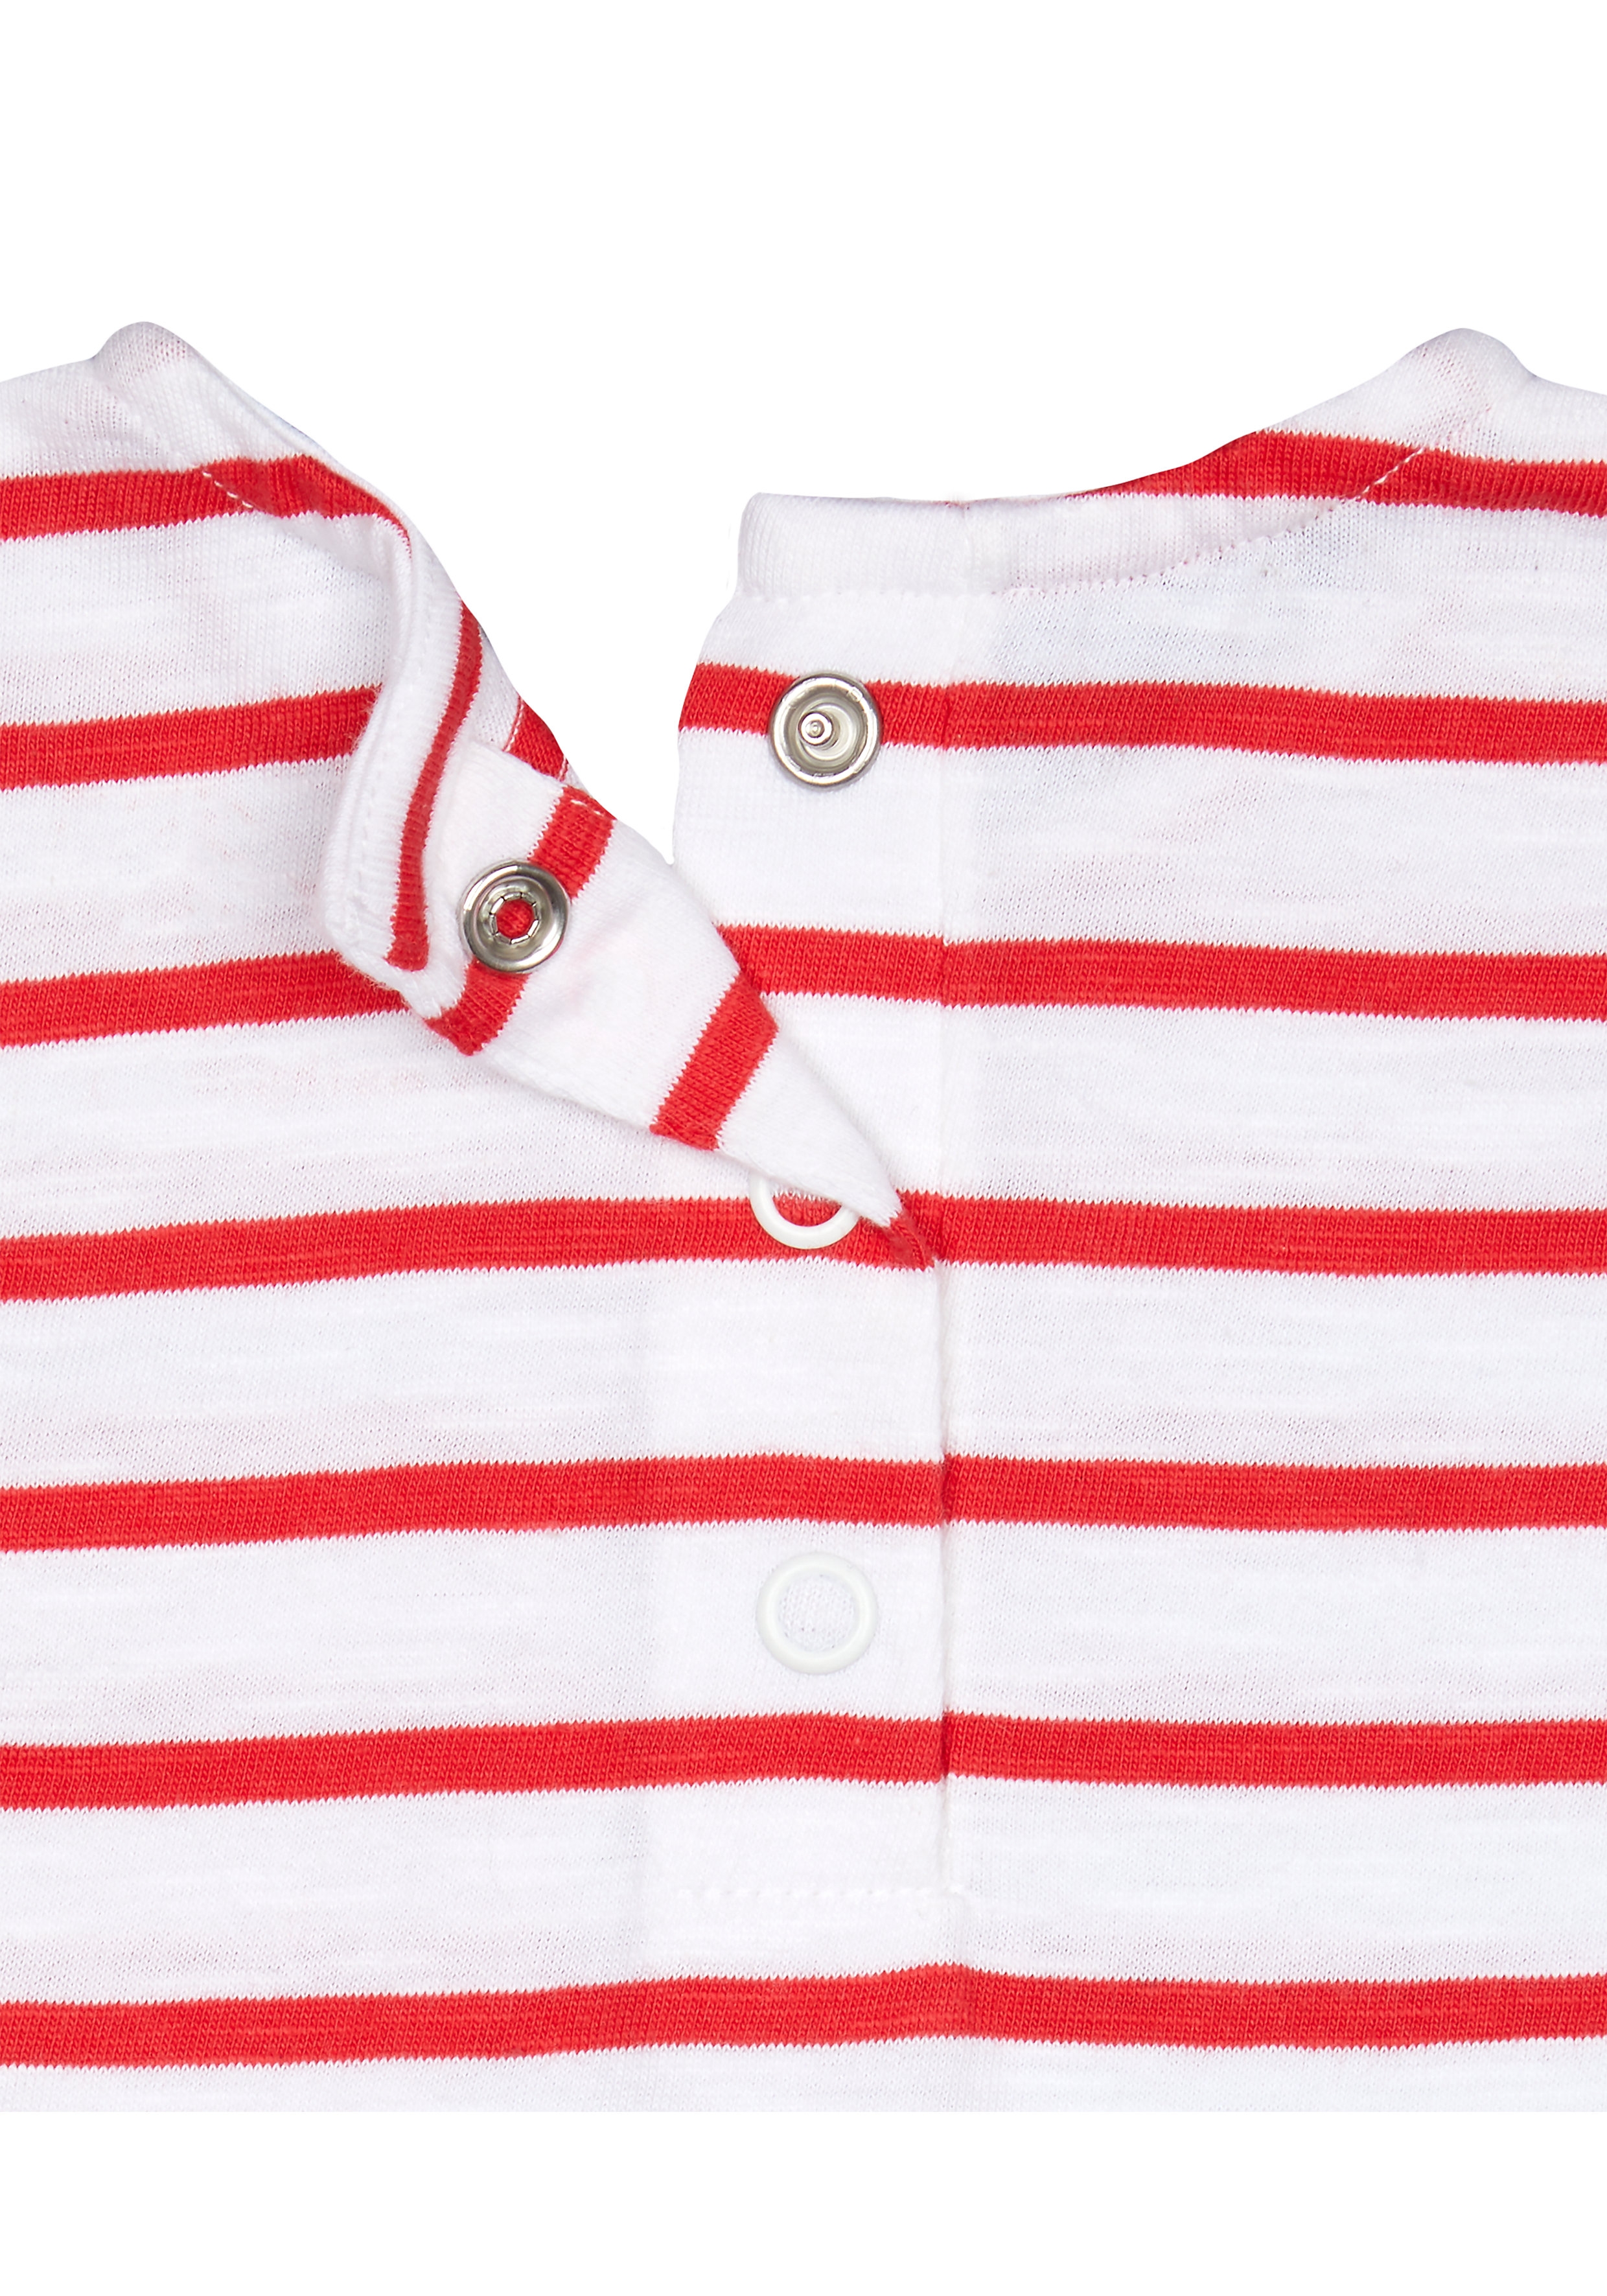 Mothercare | Girls Half Sleeves T-Shirt Striped - Red 2